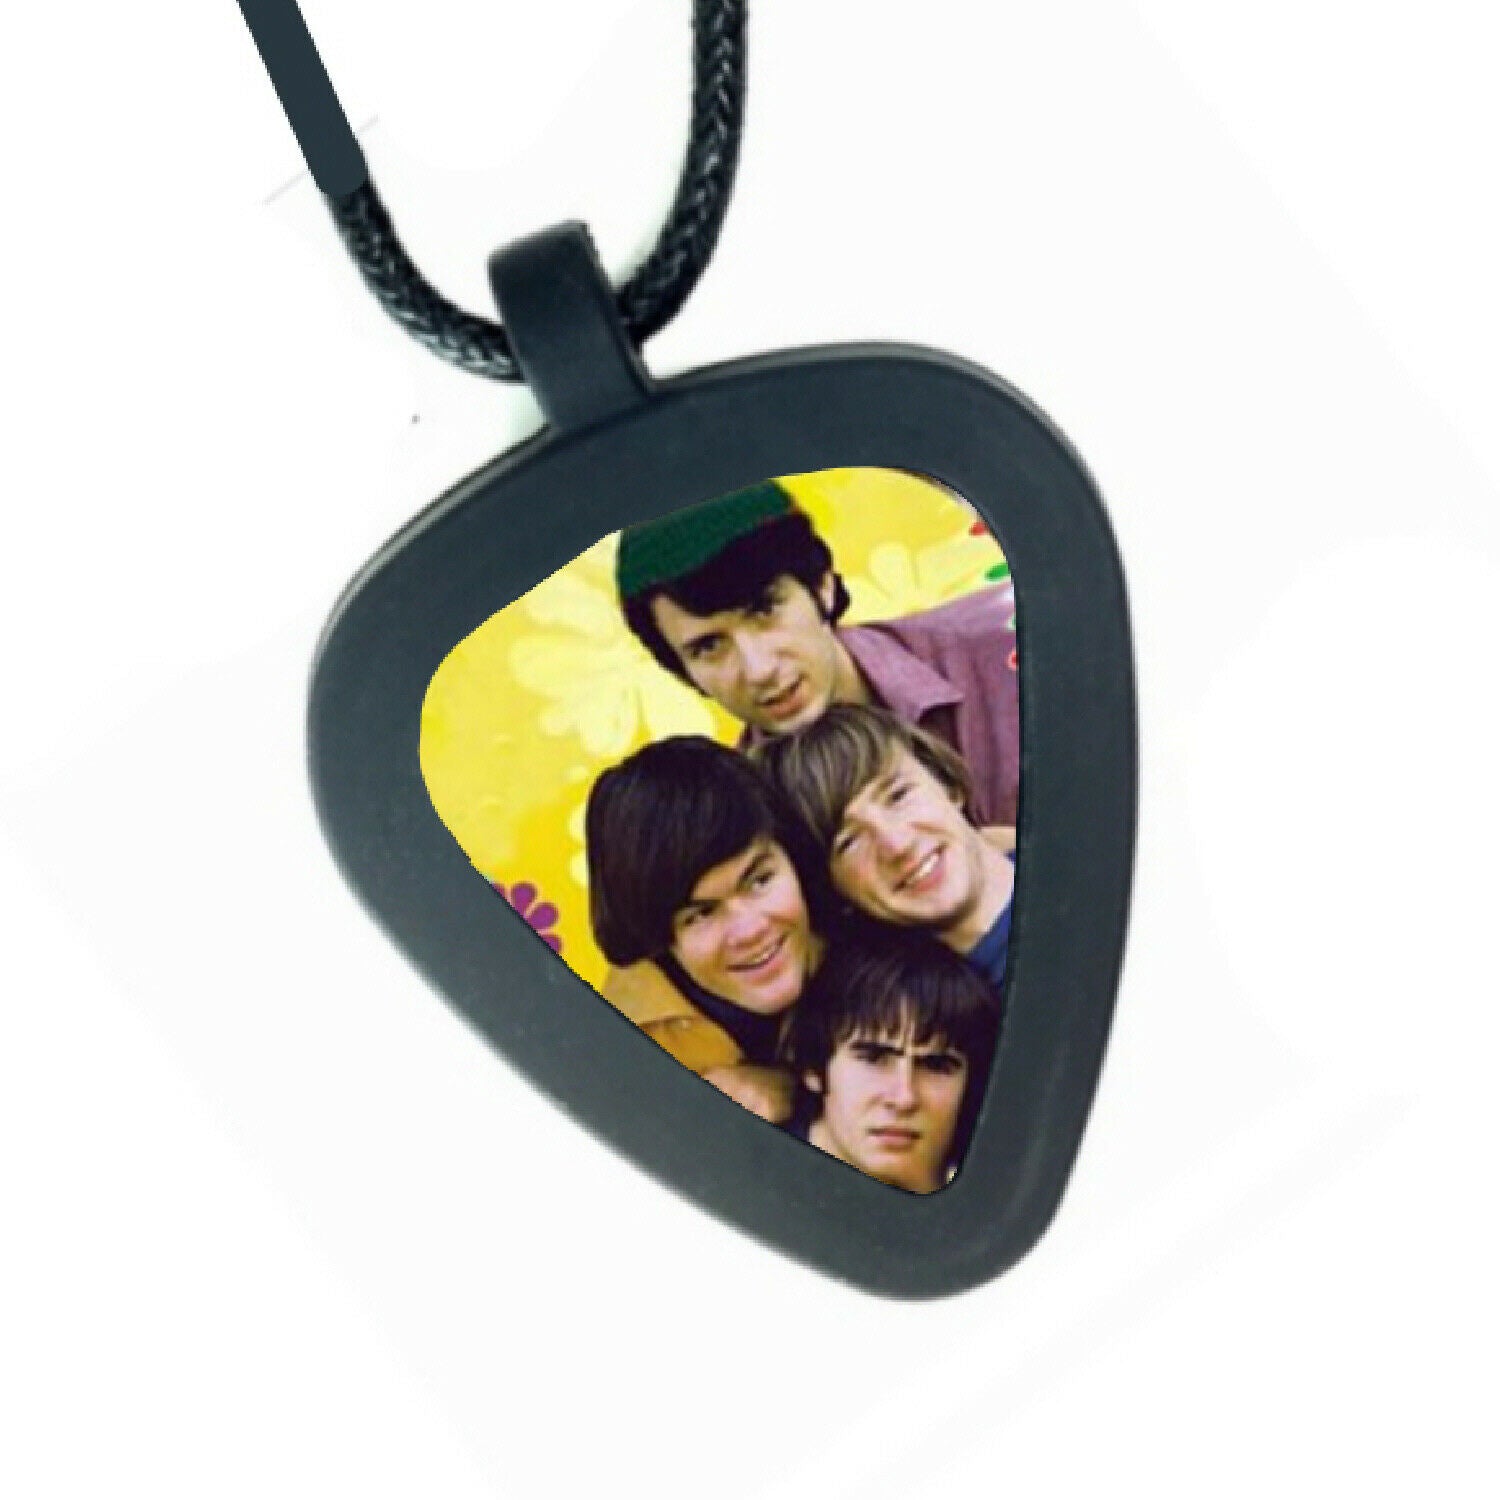 Pickbandz The Monkees Mens or Womens Real Guitar Pick Necklace